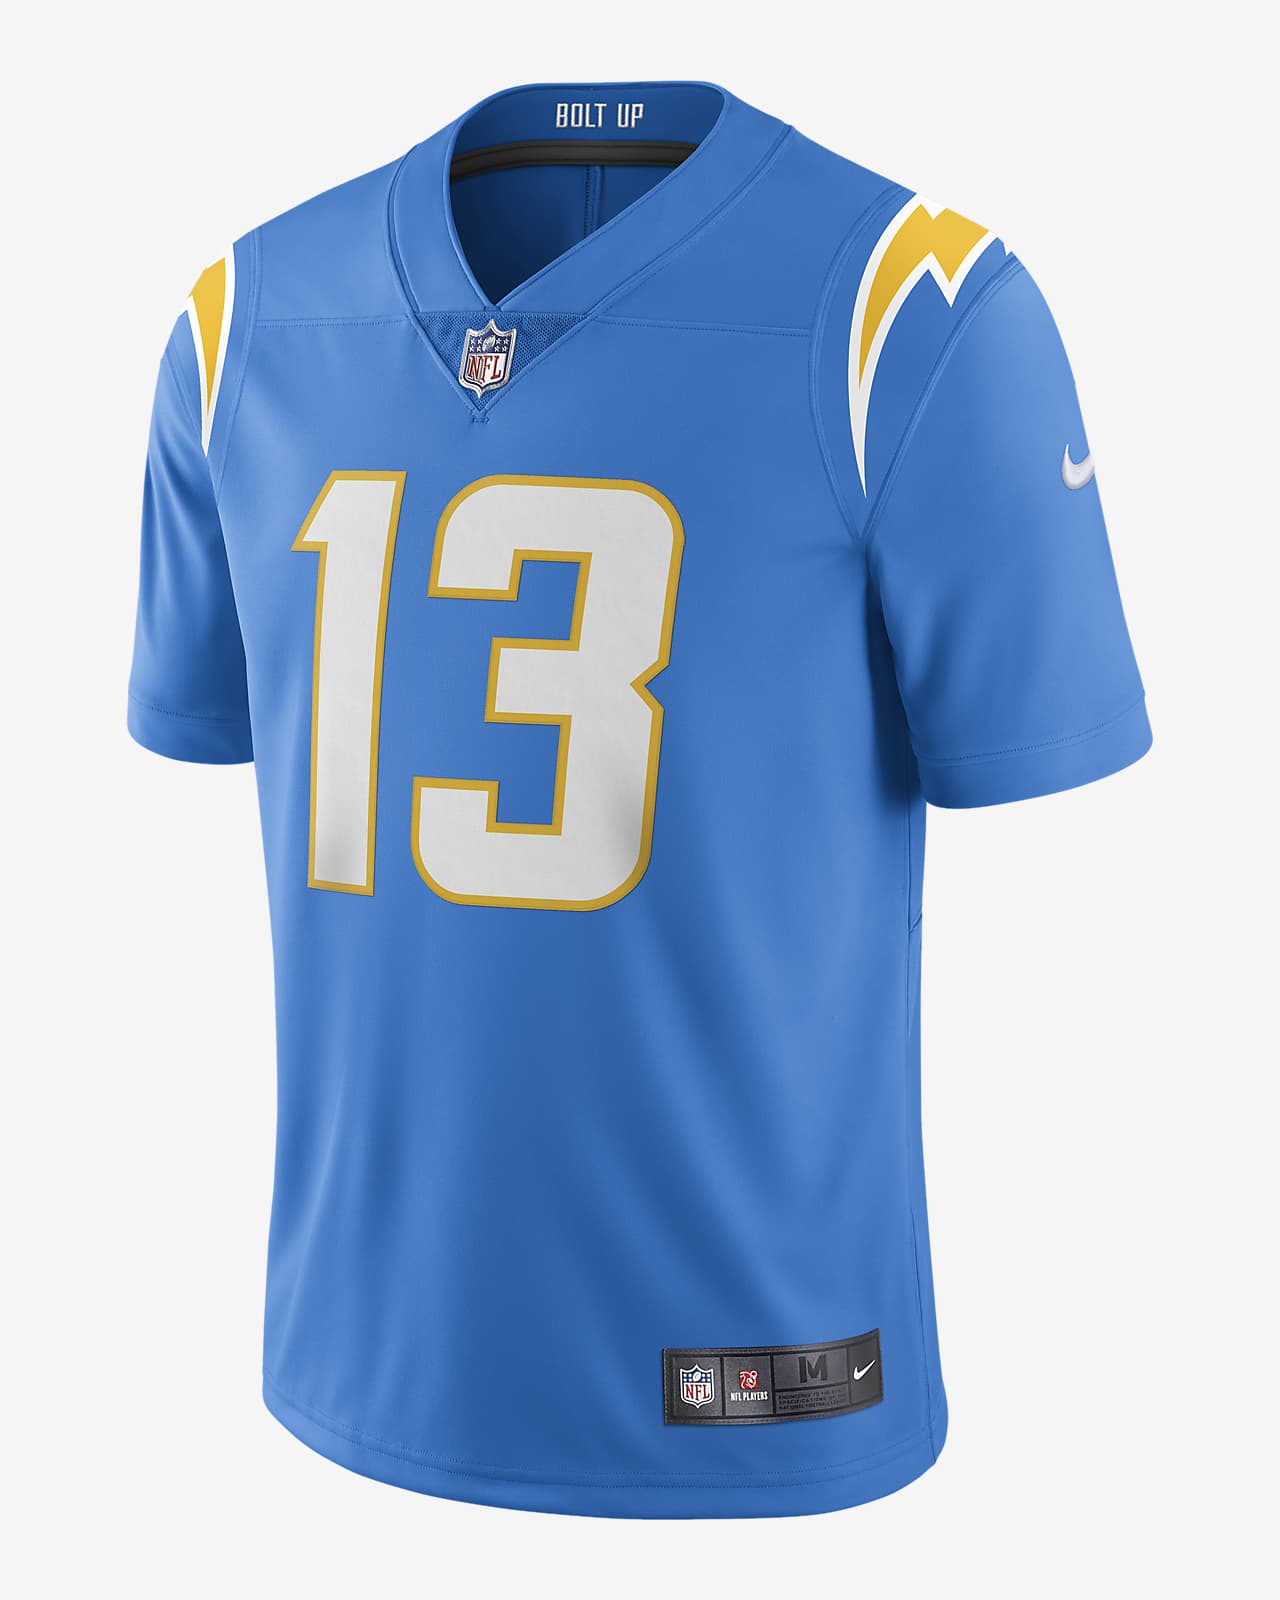 los angeles chargers jerseys